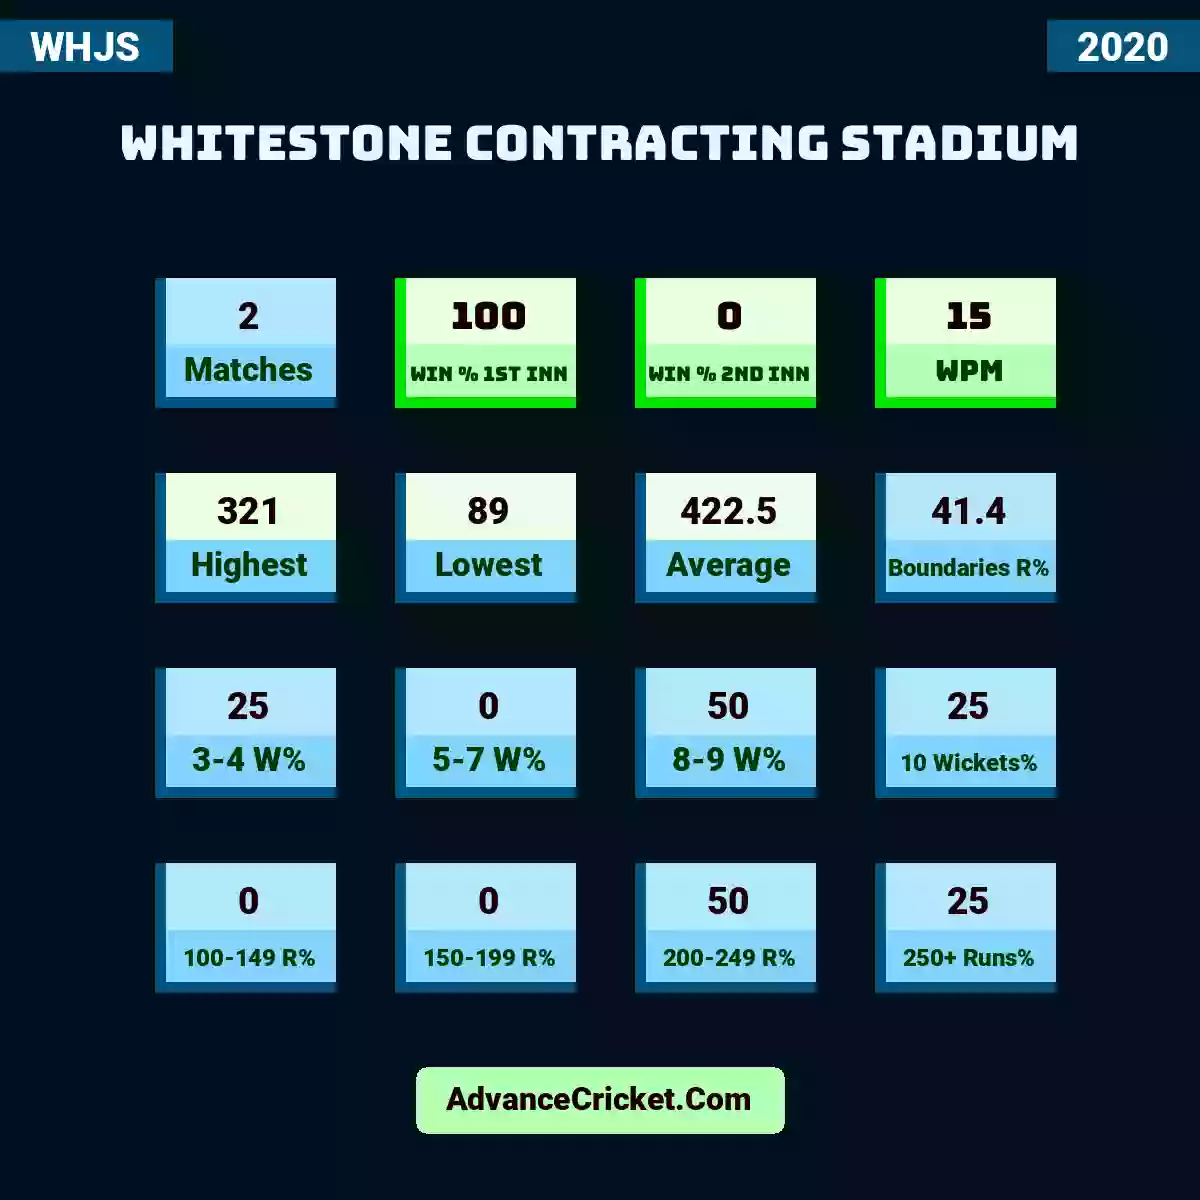 Image showing Whitestone Contracting Stadium with Matches: 2, Win % 1st Inn: 100, Win % 2nd Inn: 0, WPM: 15, Highest: 321, Lowest: 89, Average: 422.5, Boundaries R%: 41.4, 3-4 W%: 25, 5-7 W%: 0, 8-9 W%: 50, 10 Wickets%: 25, 100-149 R%: 0, 150-199 R%: 0, 200-249 R%: 50, 250+ Runs%: 25.